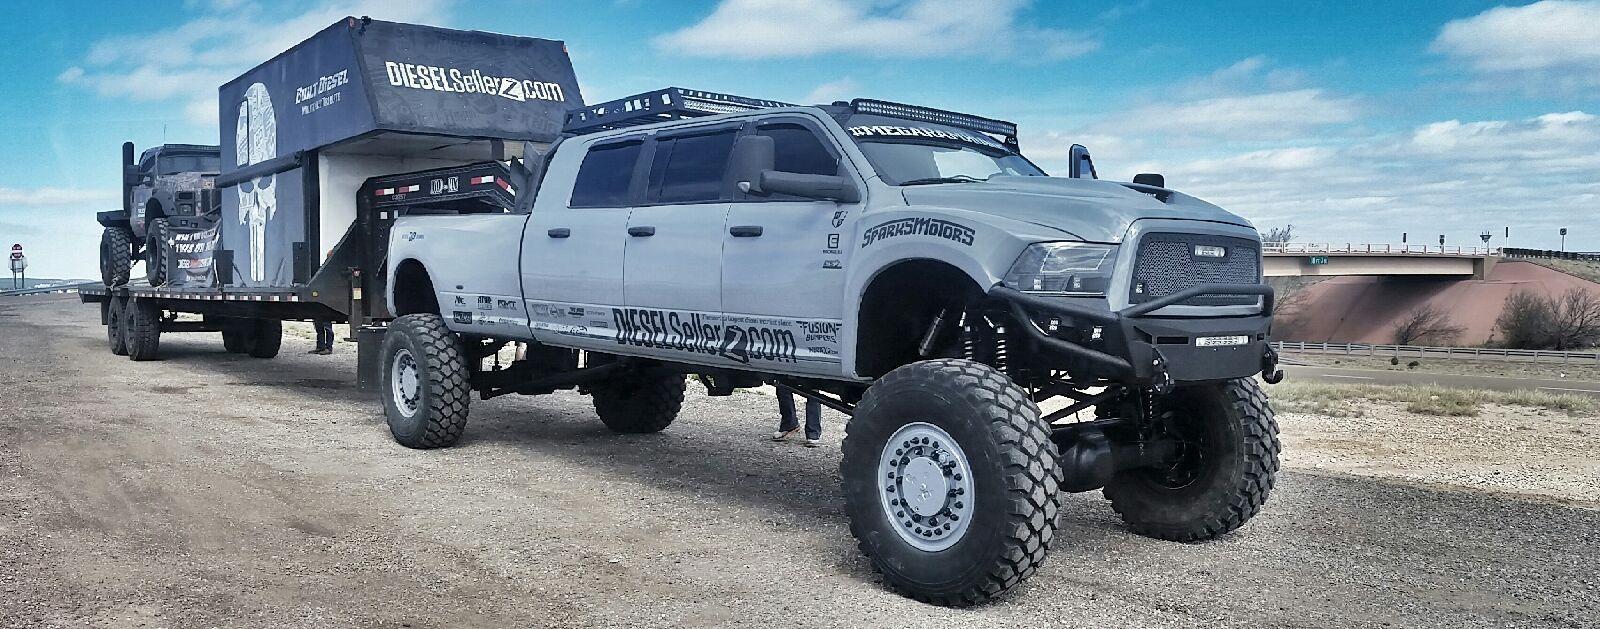 Diesel Brothers: These Guys Build the Baddest Trucks in the World